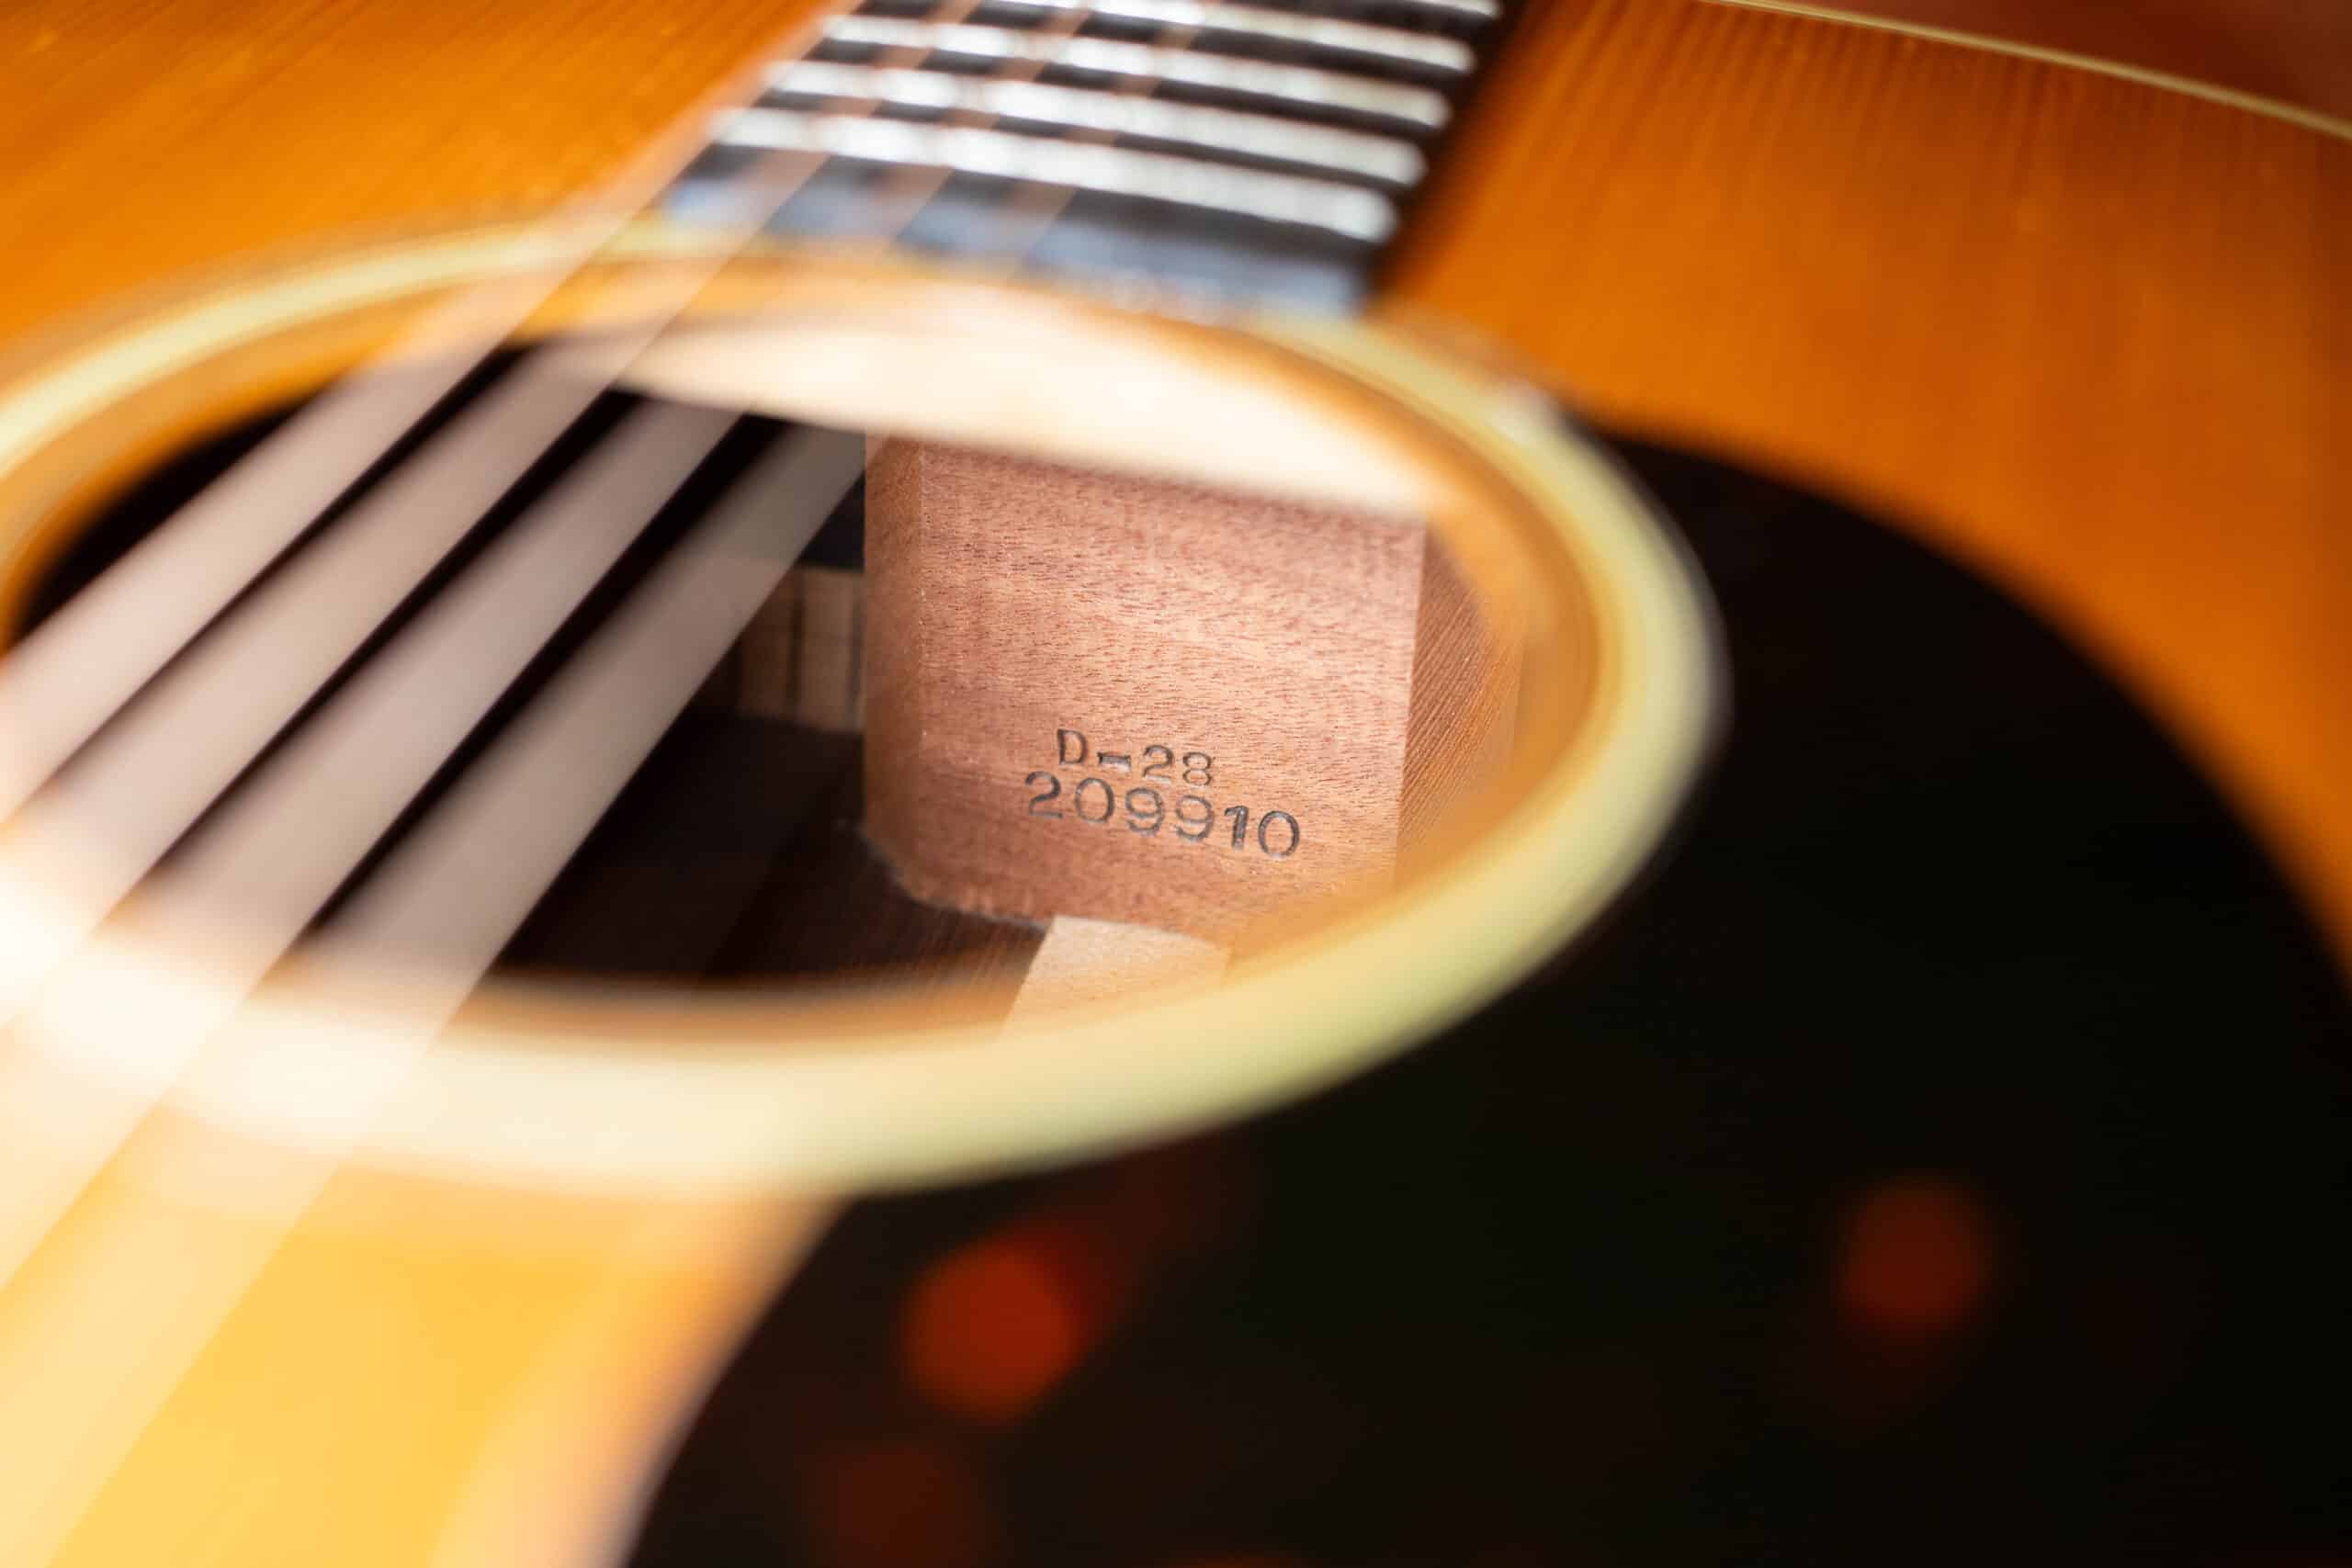 The serial number of the 1966 Martin D-28.